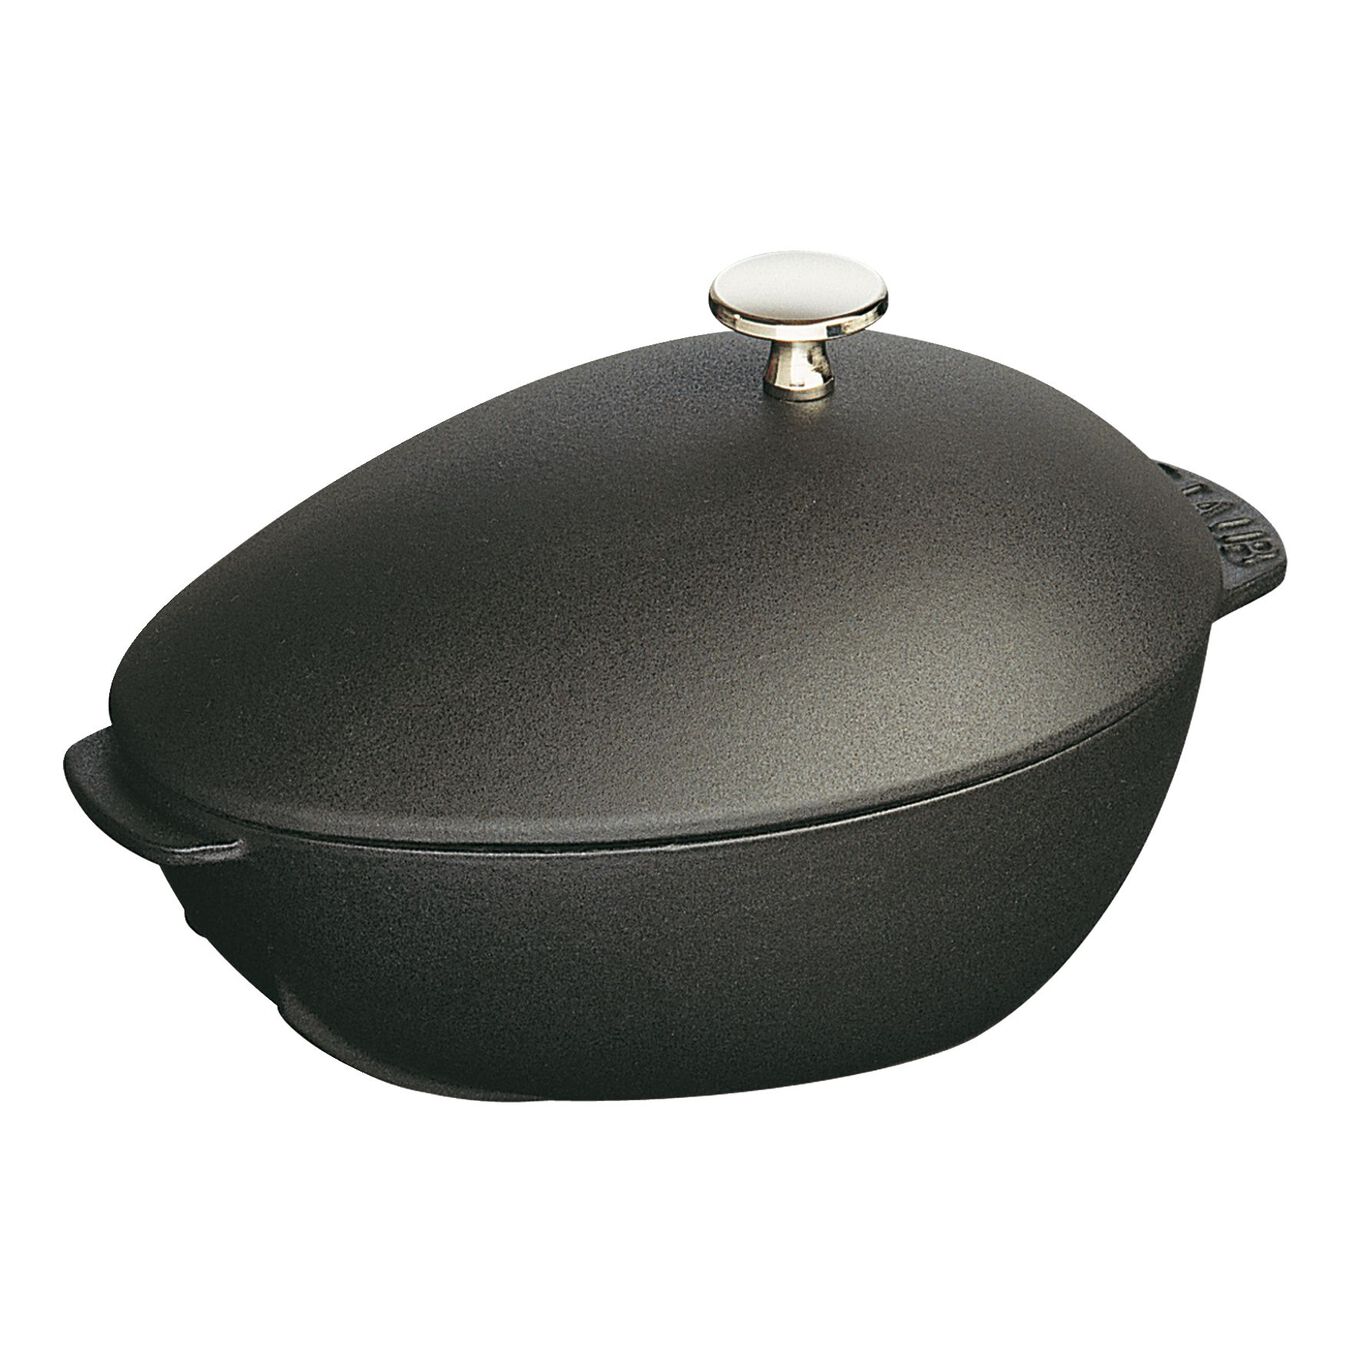 2 l cast iron oval Mussel pot, black - Visual Imperfections,,large 3